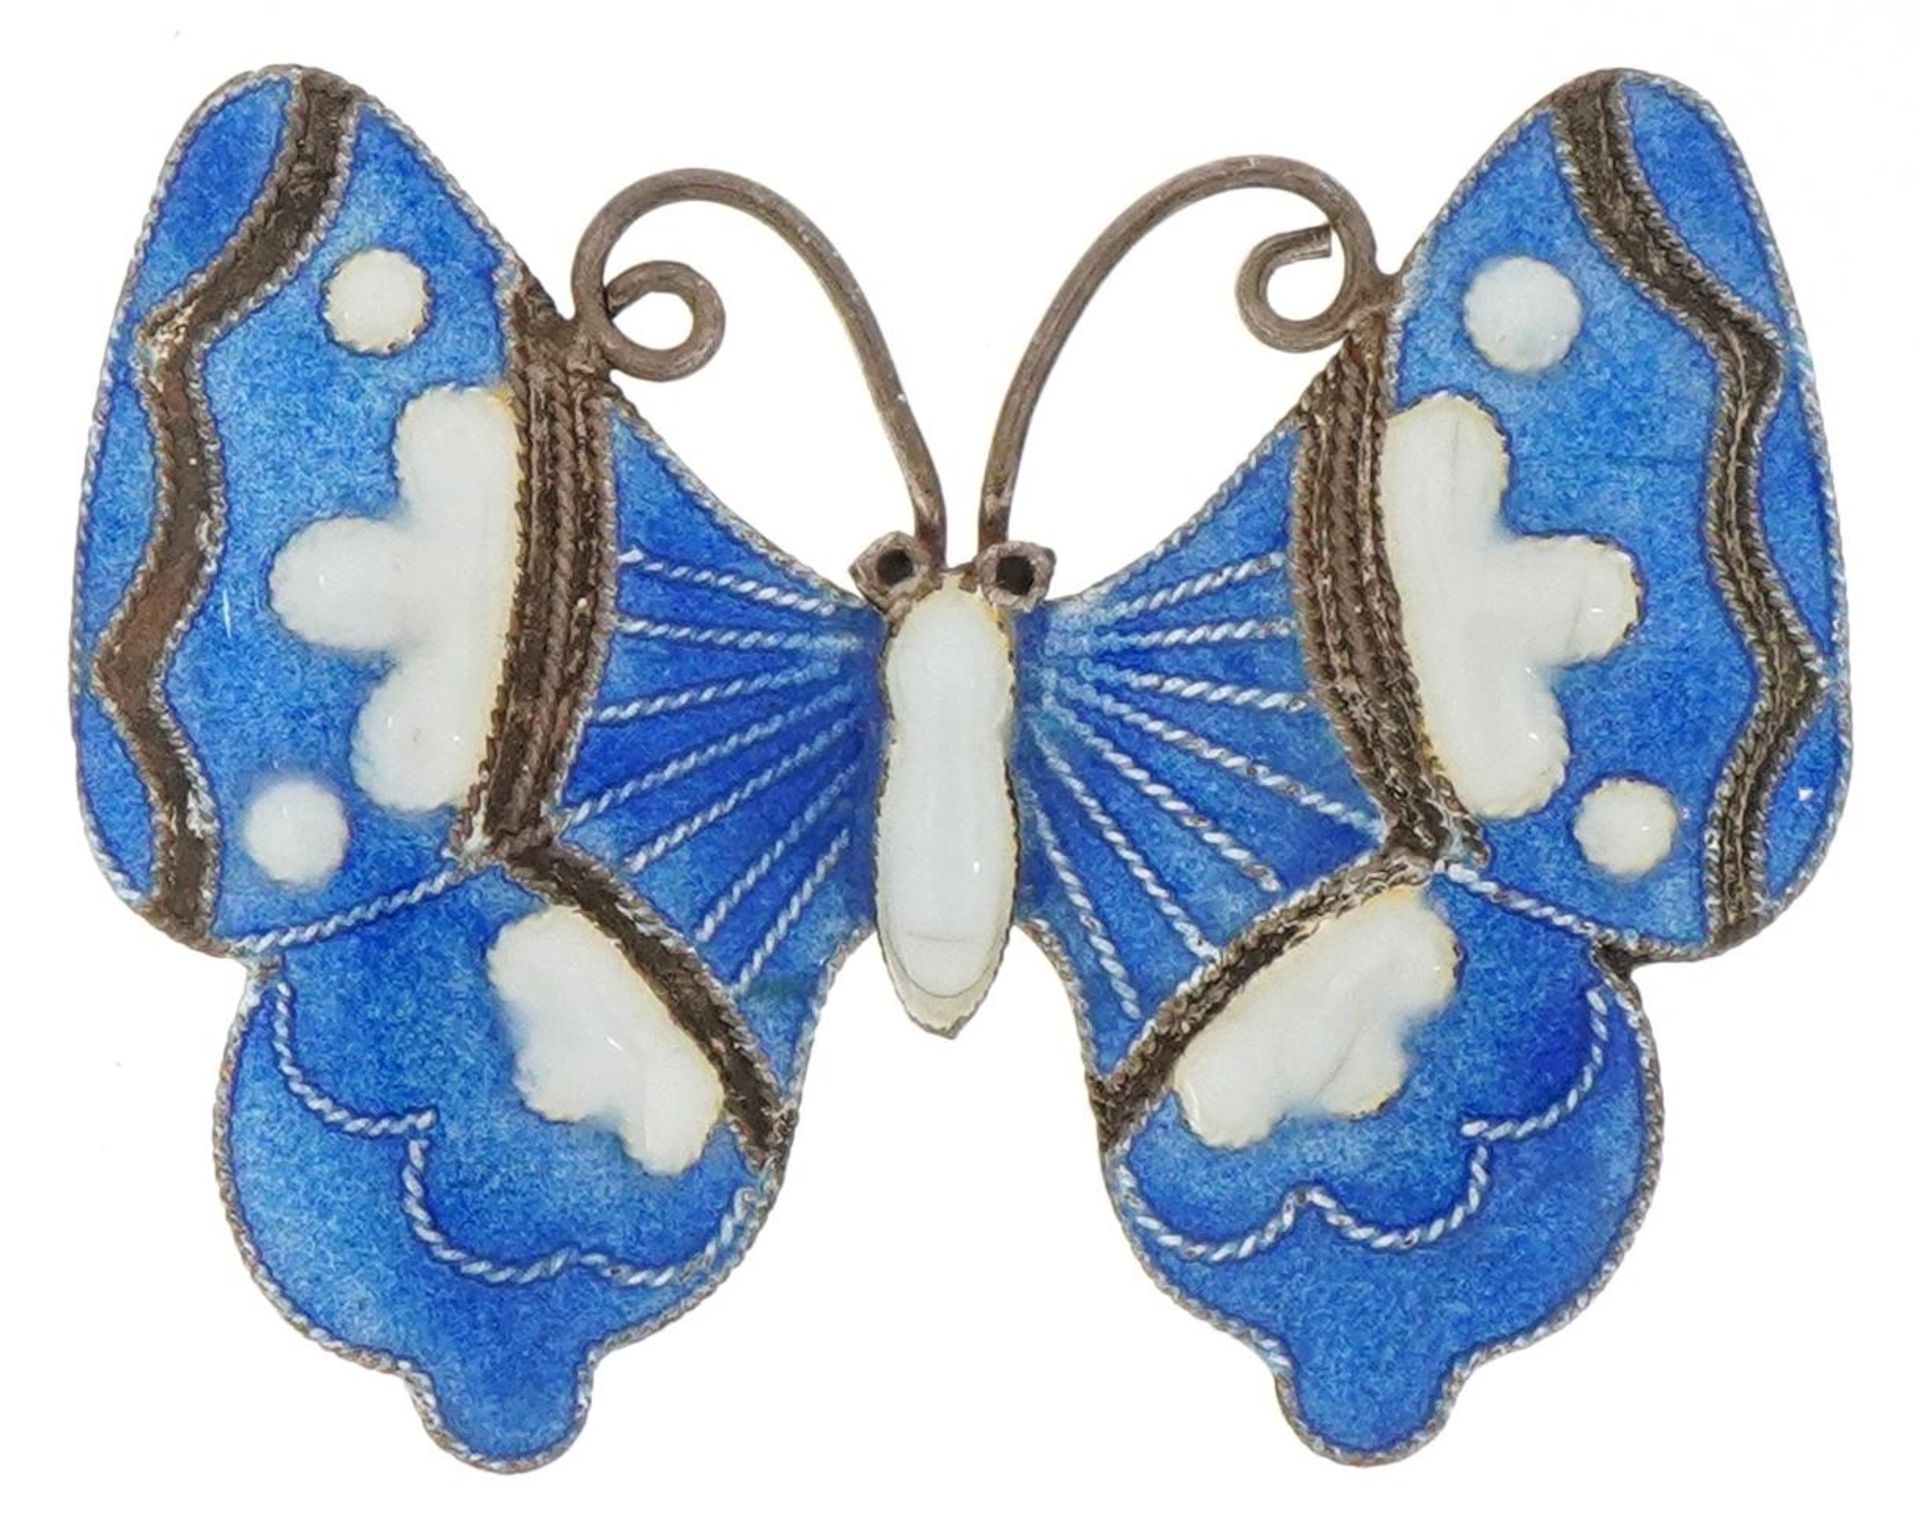 925S sterling silver and guilloche enamel butterfly brooch, possibly Danish, 3cm wide, 3.1g